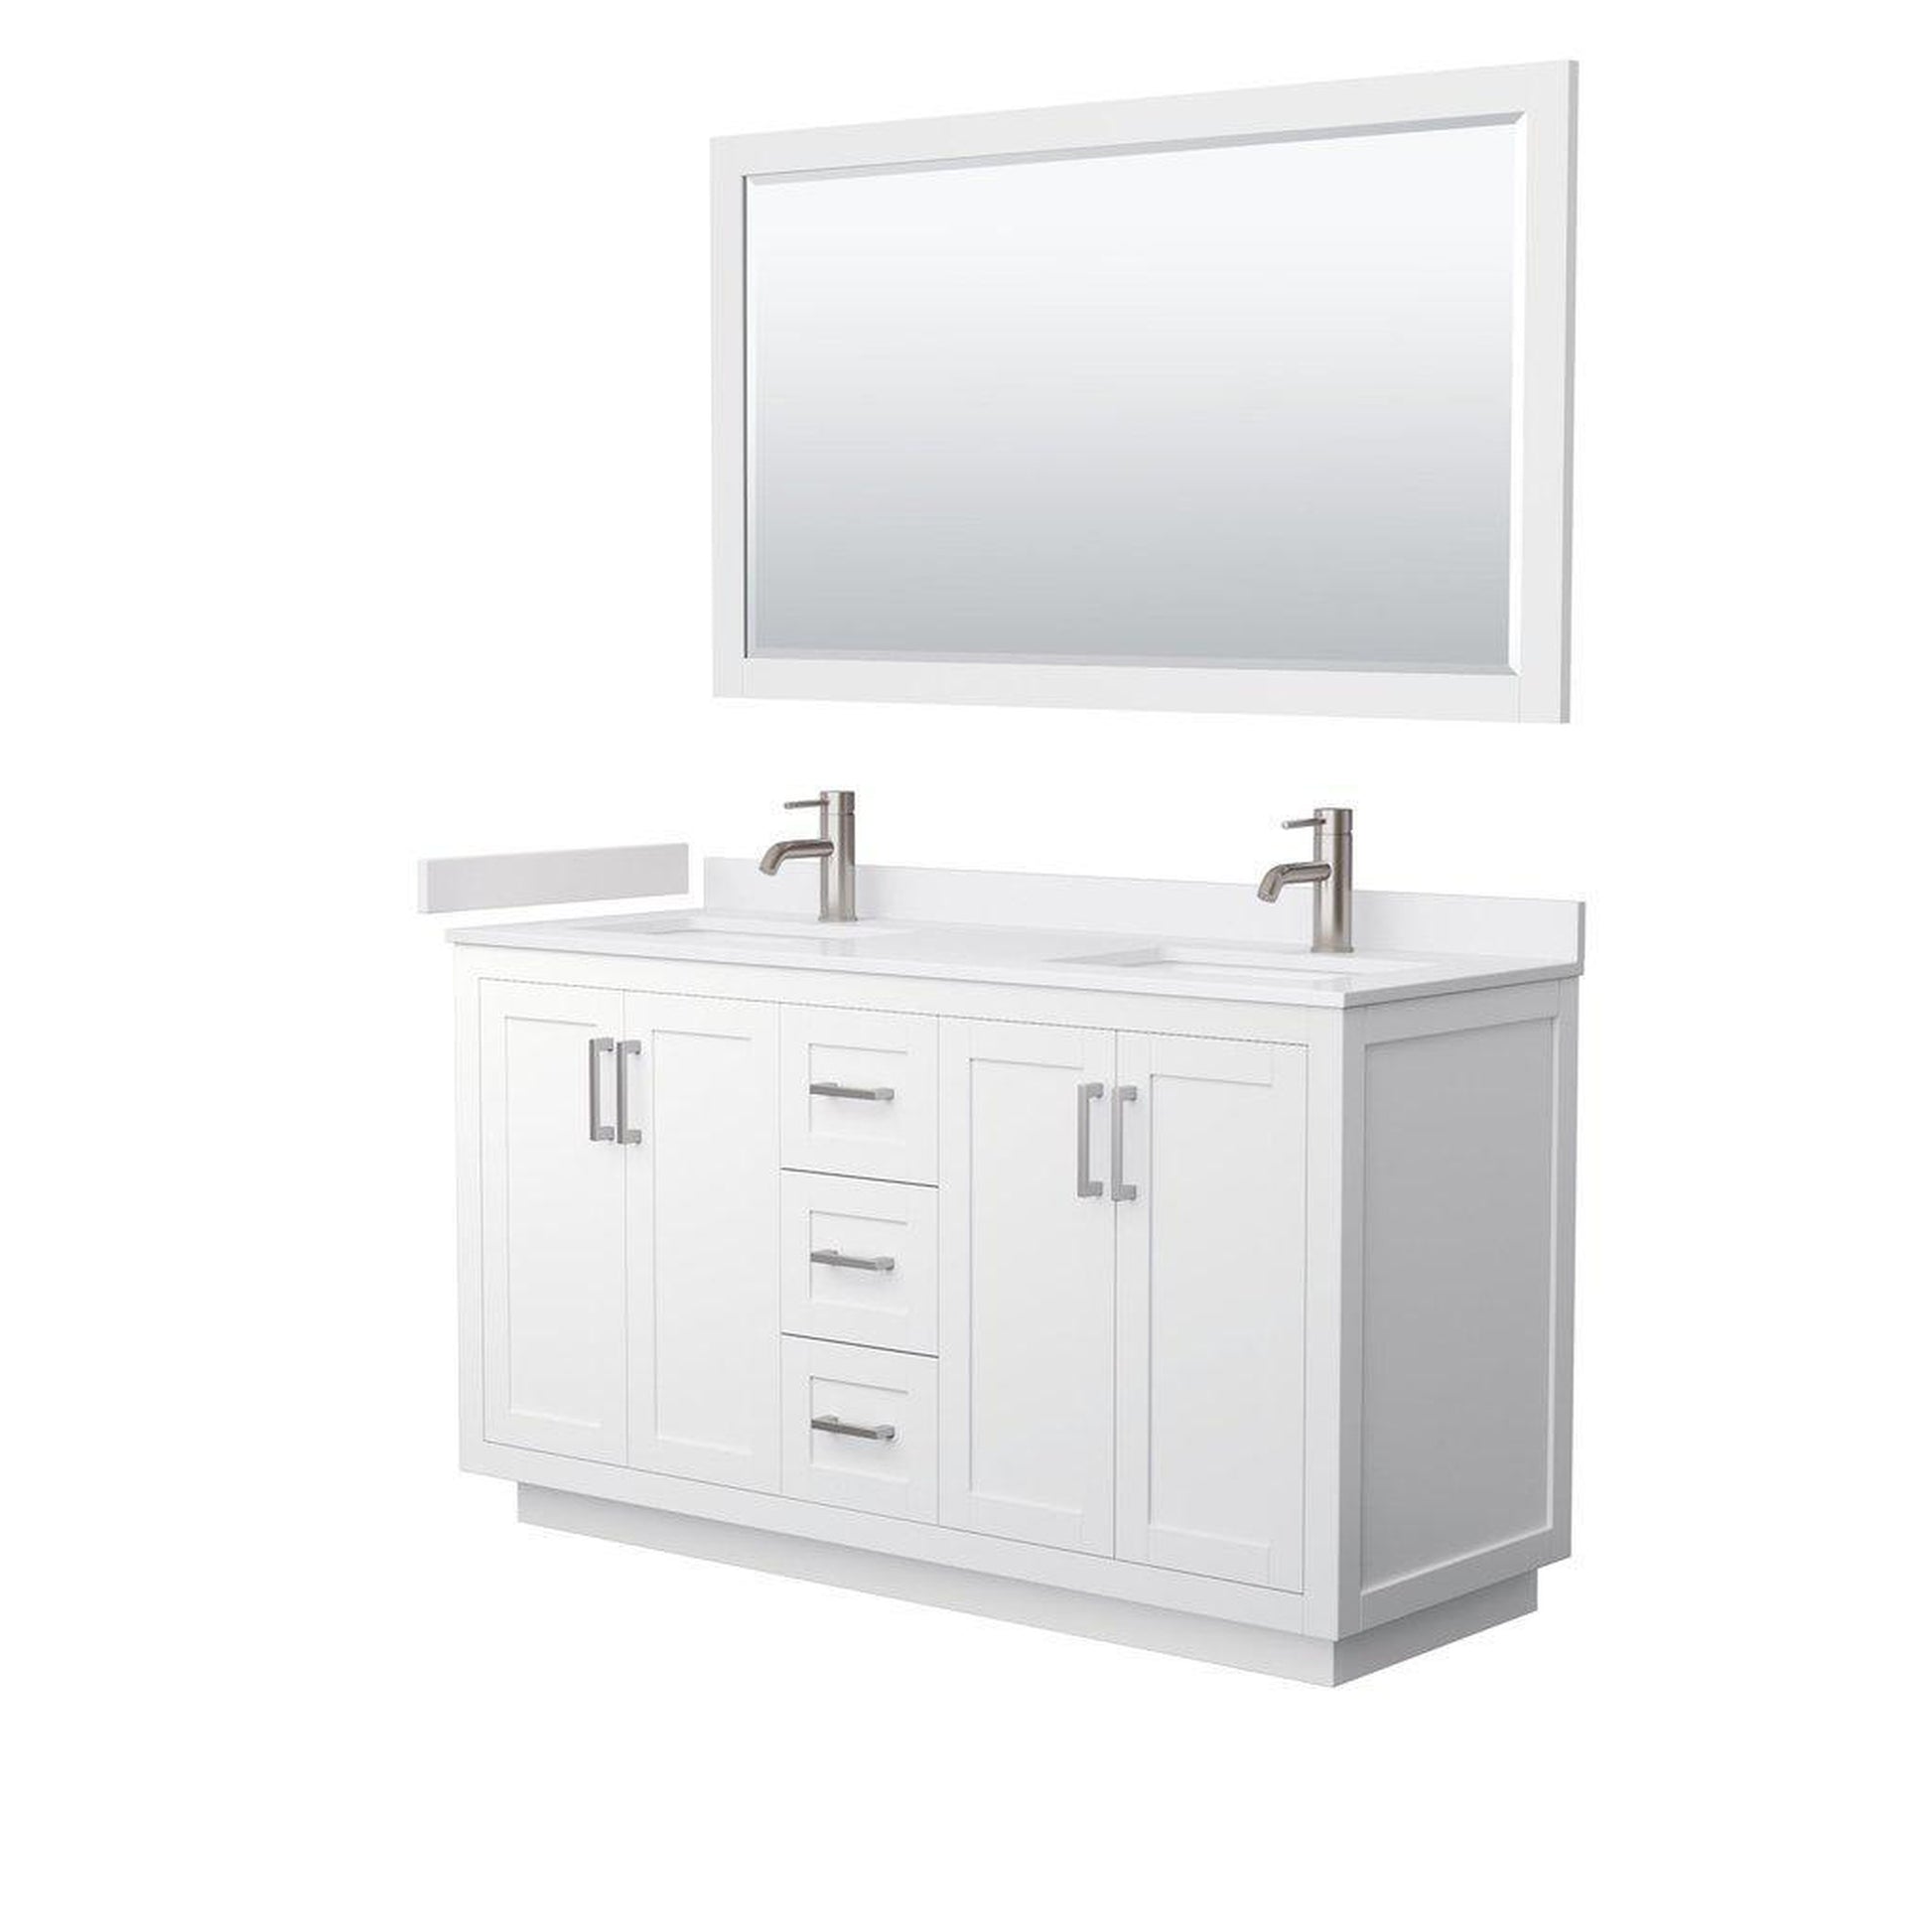 Wyndham Collection Miranda 60" Double Bathroom White Vanity Set With White Cultured Marble Countertop, Undermount Square Sink, 58" Mirror And Brushed Nickel Trim